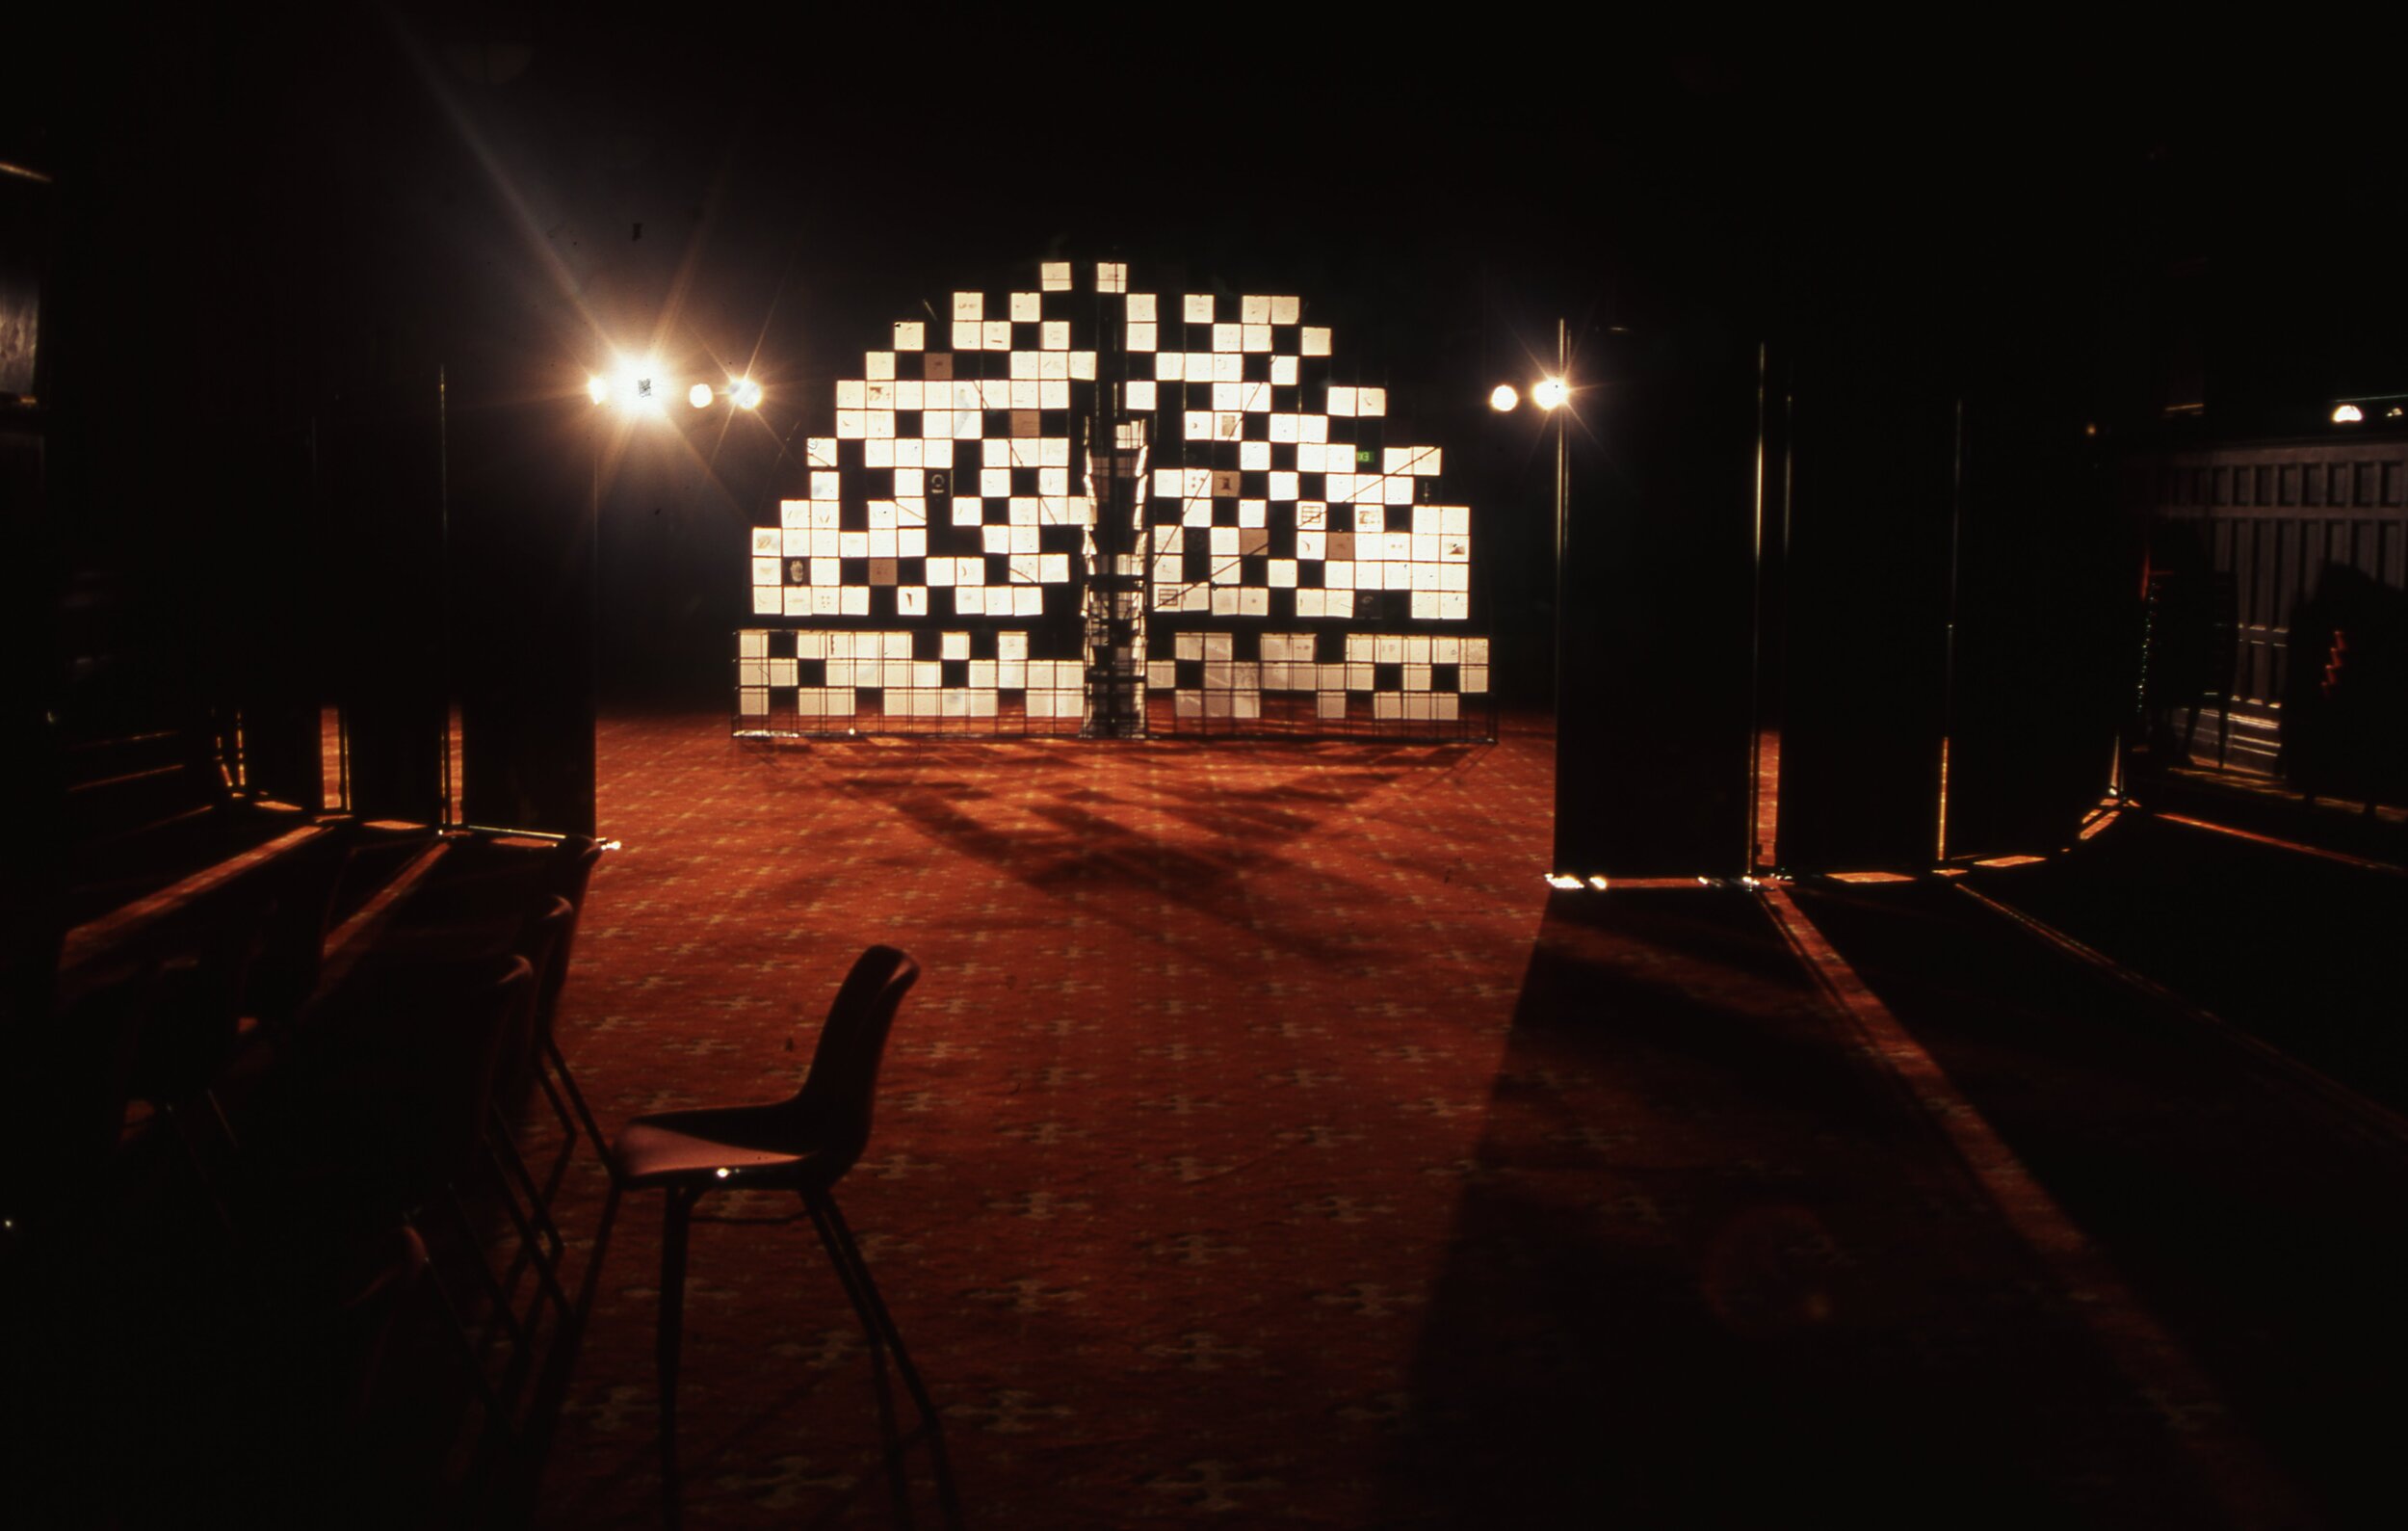  Installation view of the exhibition  Out of Oblivion,  held in the MacLaurin Hall at The University of Sydney, 1998. Photo: Courtesy of Diana Wood Conroy 